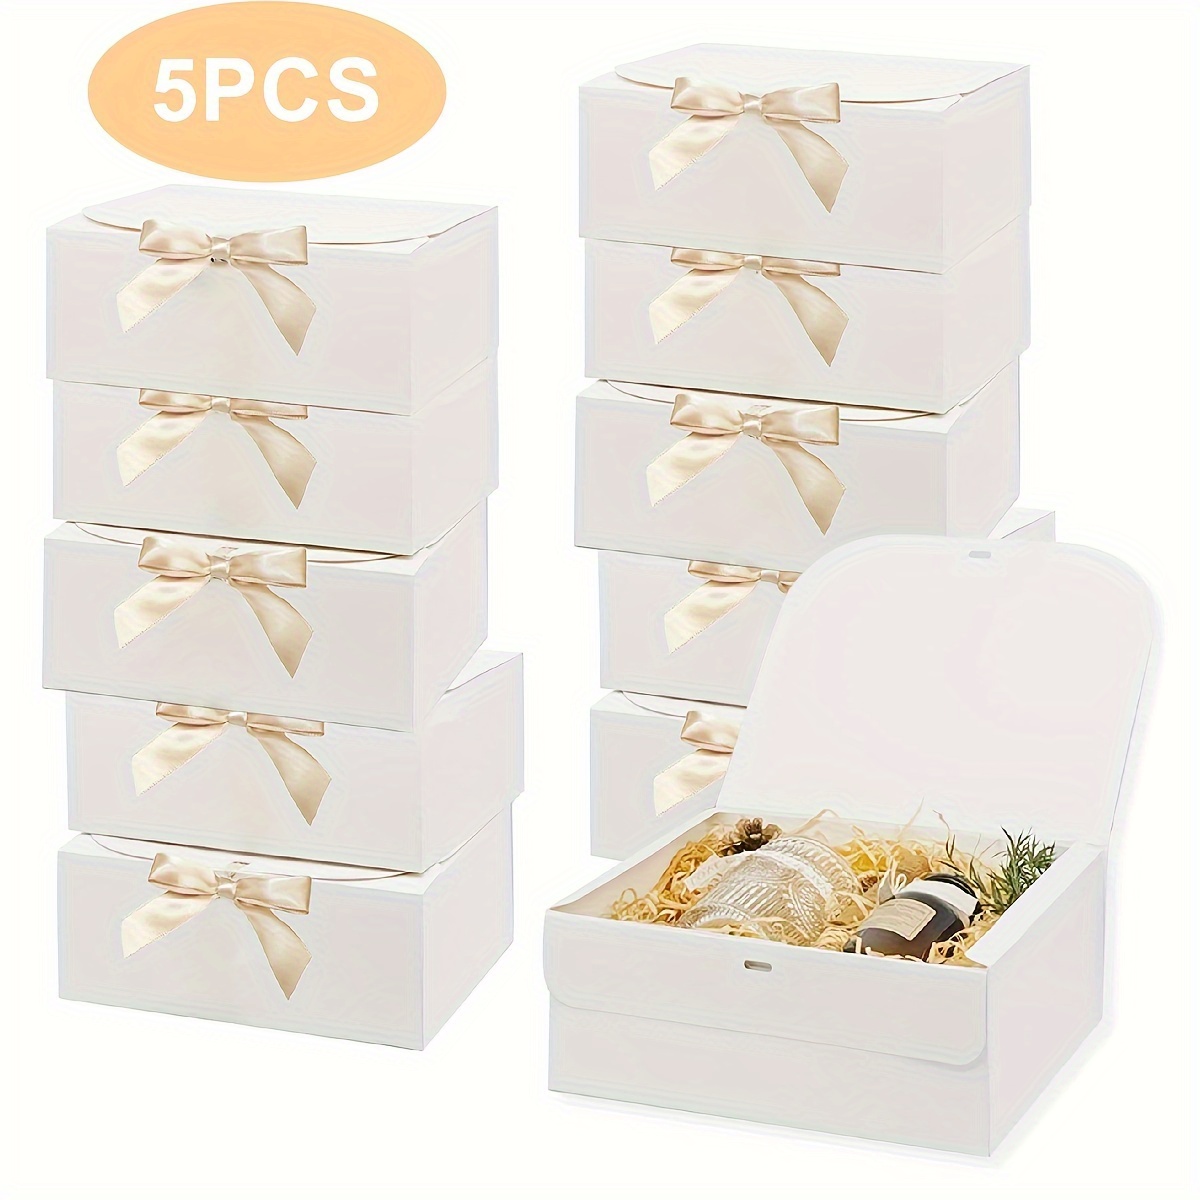 

Elegant 5-piece Large White Gift Boxes With Ribbons - Versatile & Durable For Birthdays, Weddings, And Special Occasions